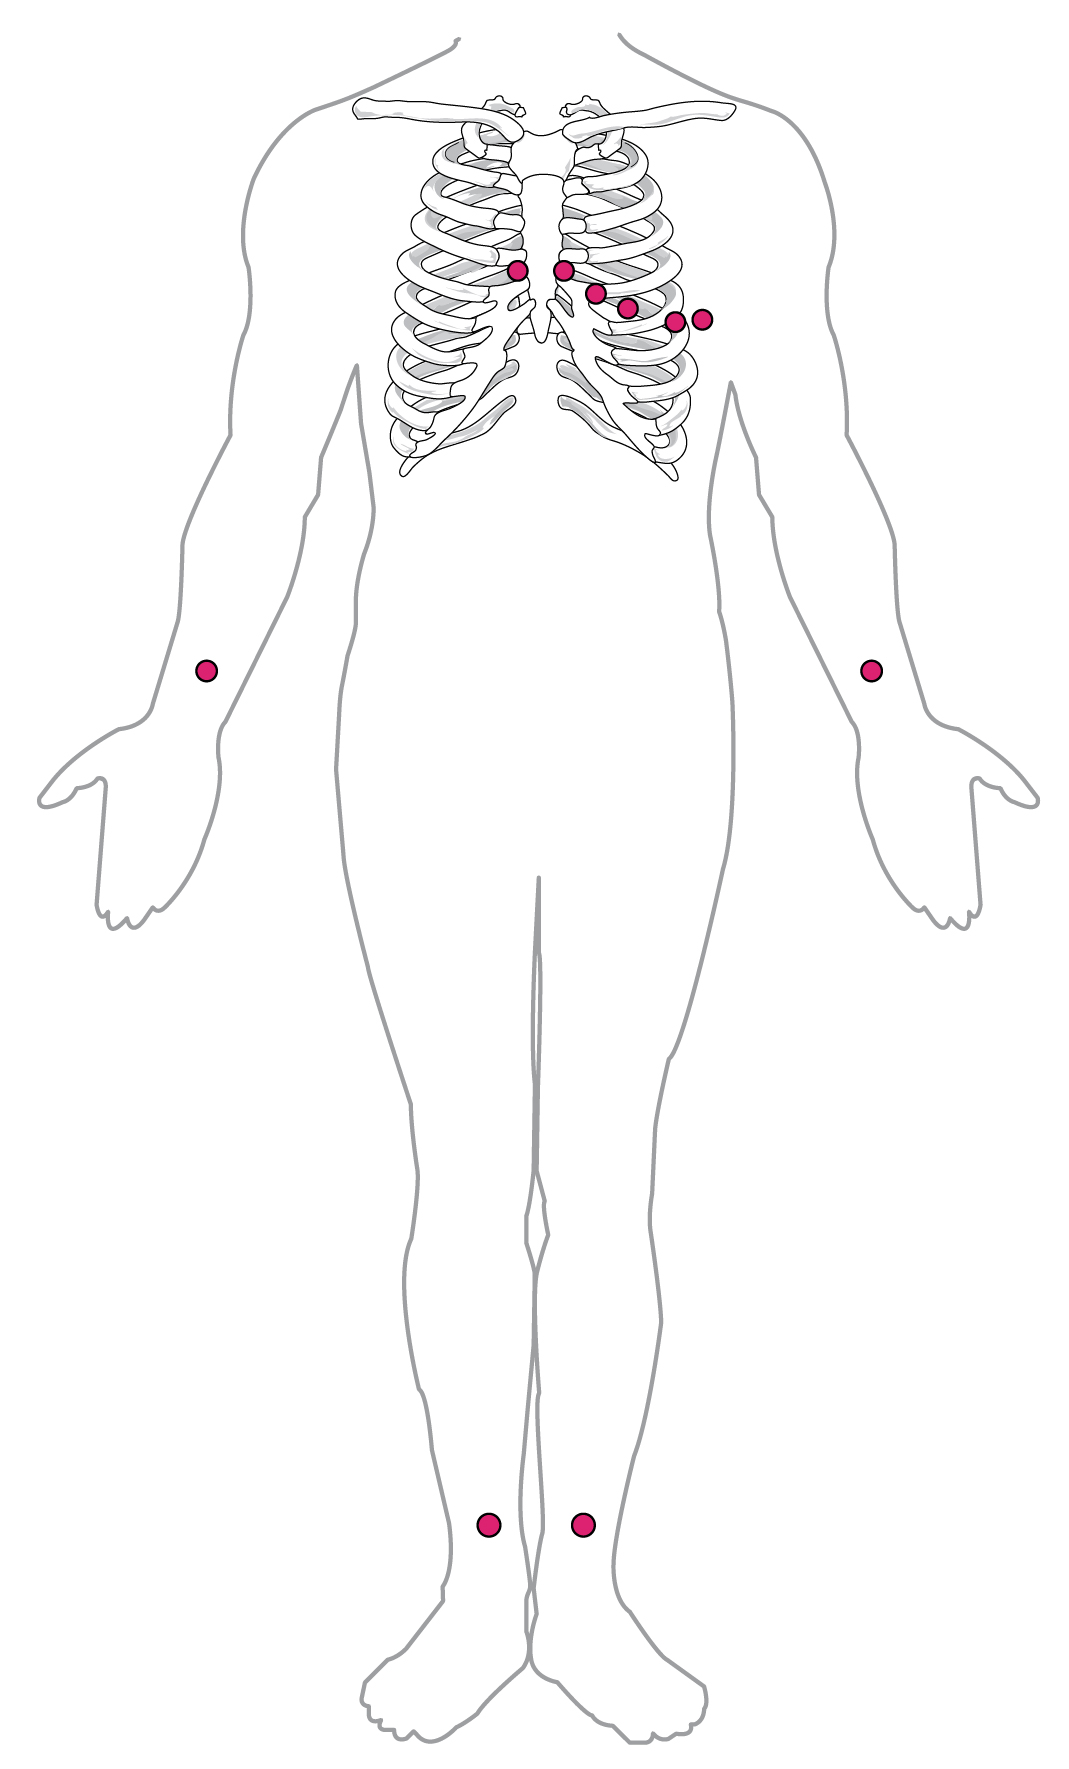 This diagram shows the points where electrodes are placed on the body for an ECG.